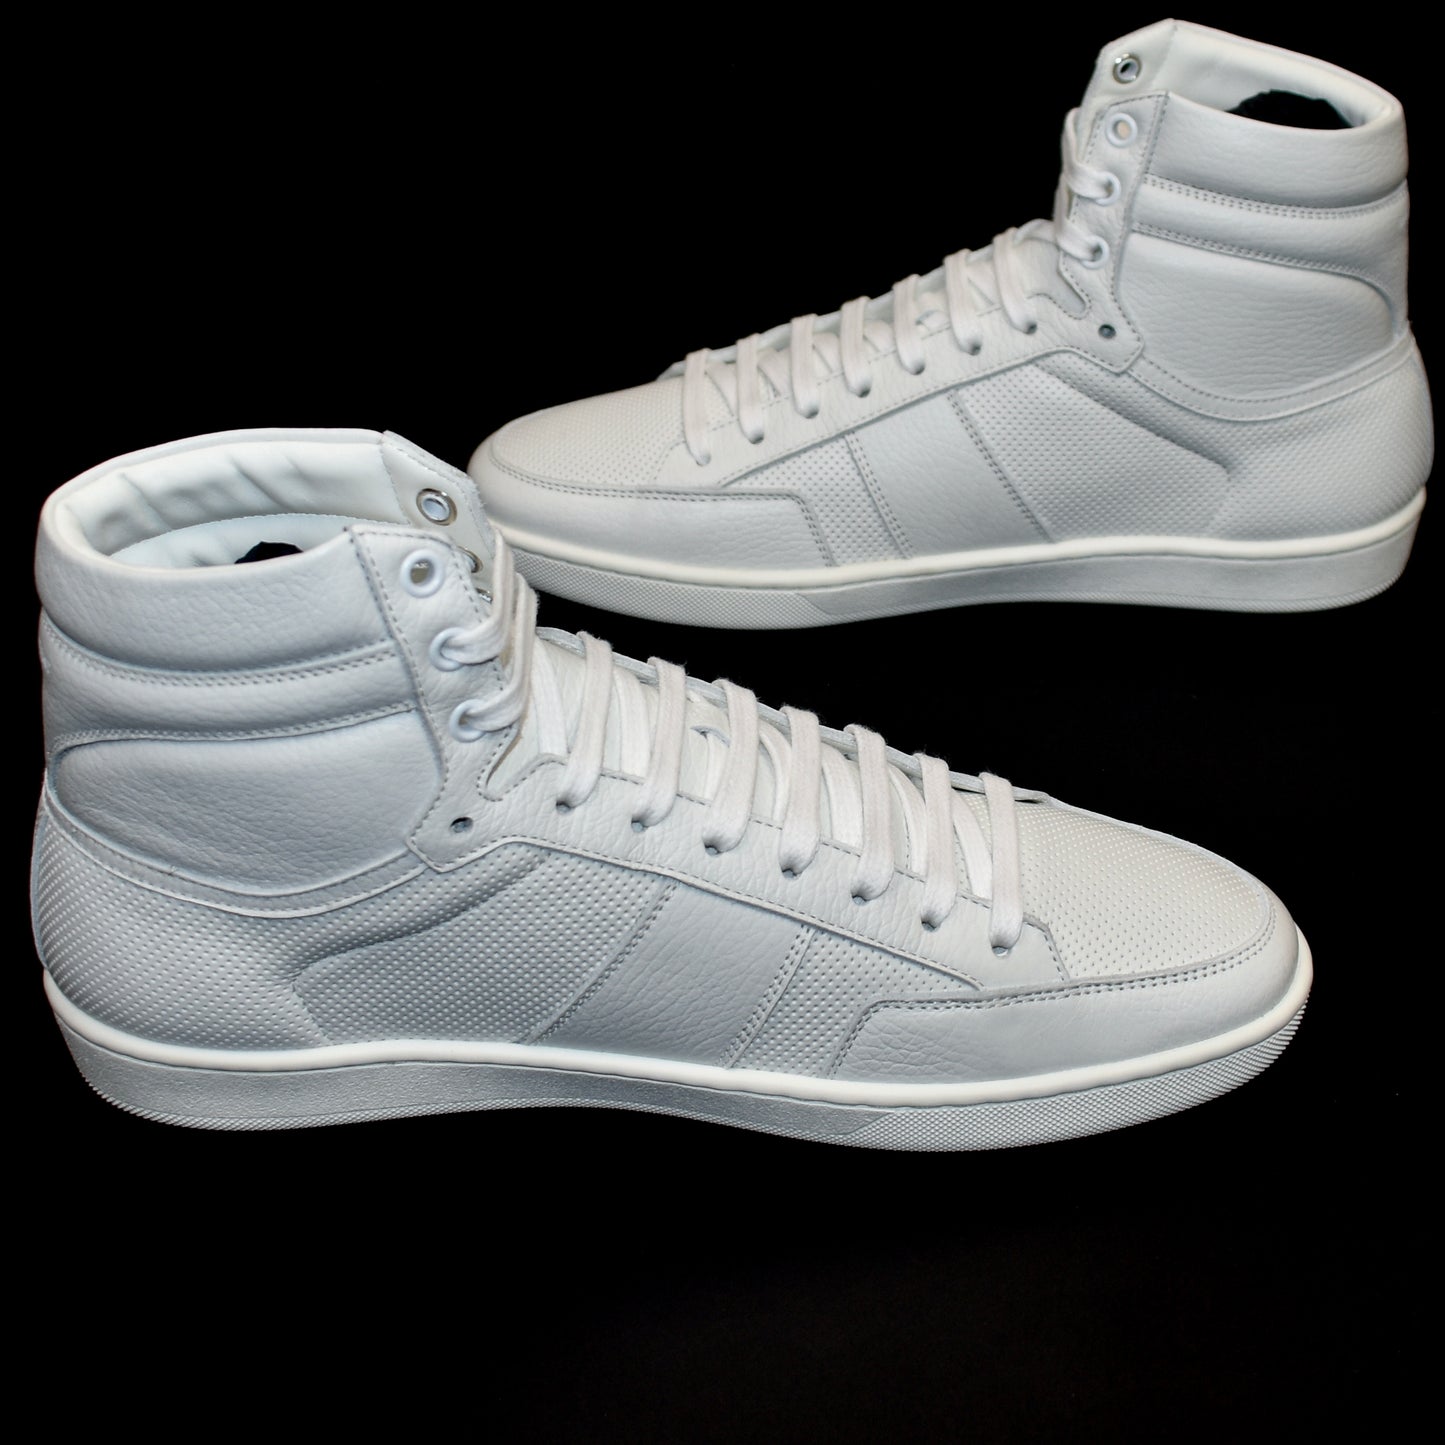 Saint Laurent - White Leather SL/10H High Top Sneakers